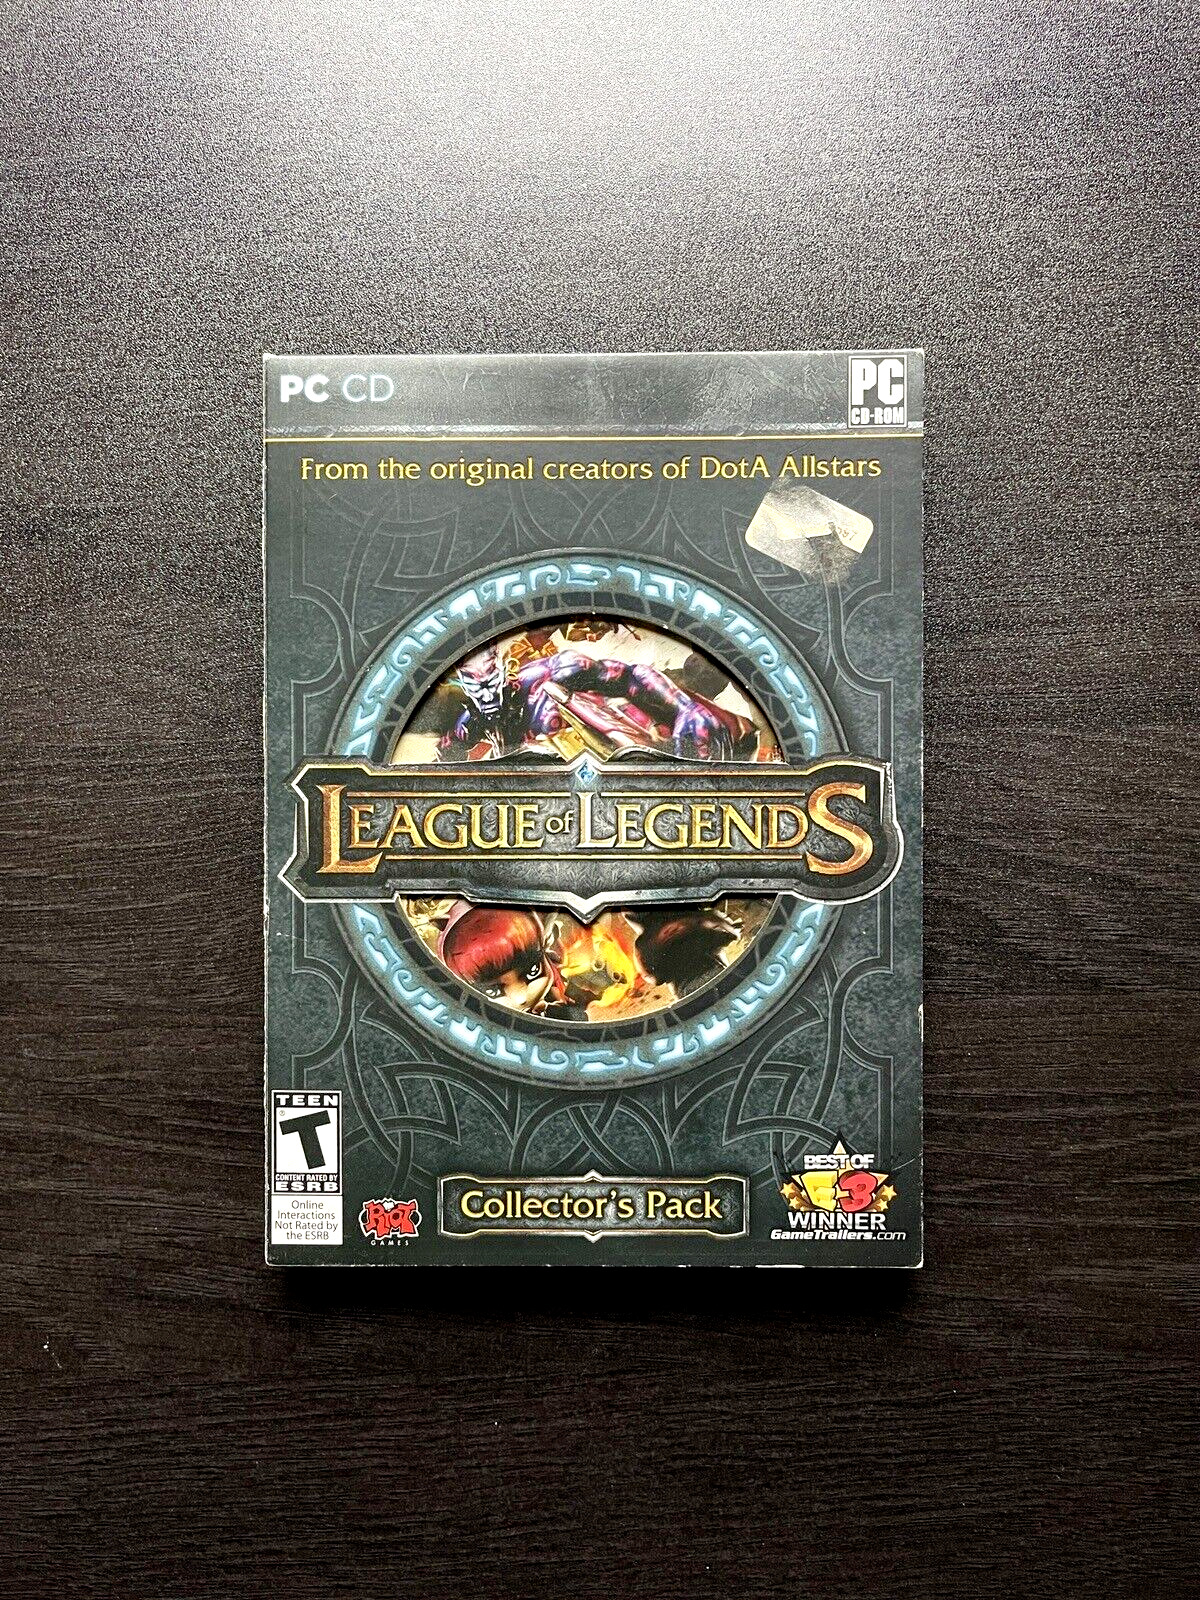 League of Legends Collector's Pack (PC, 2009) Complete CIB | Codes likely used